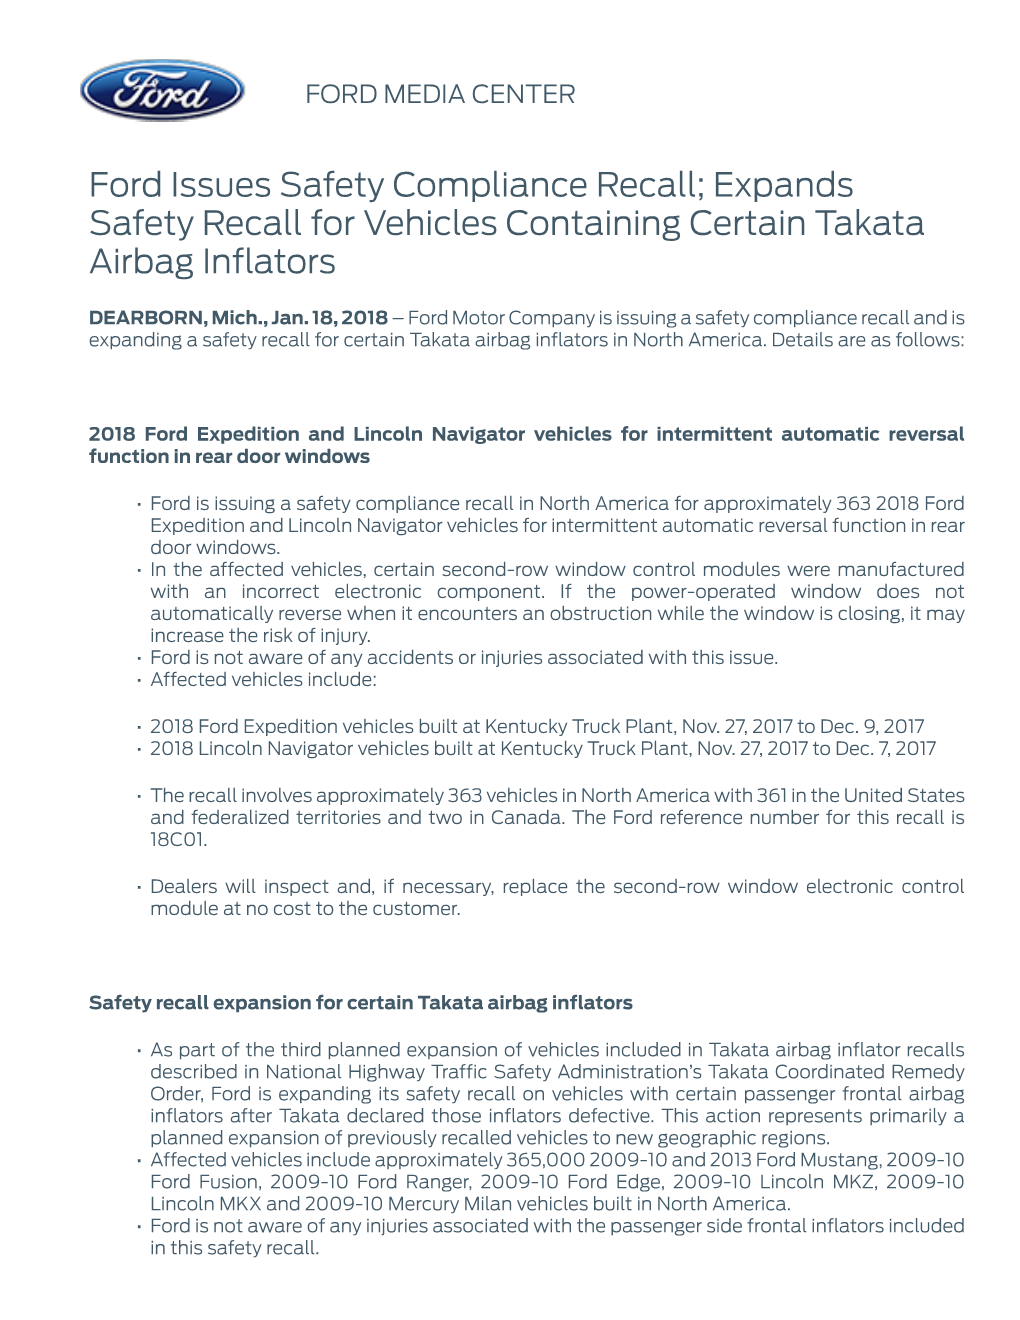 Ford Issues Safety Compliance Recall; Expands Safety Recall for Vehicles Containing Certain Takata Airbag Inflators